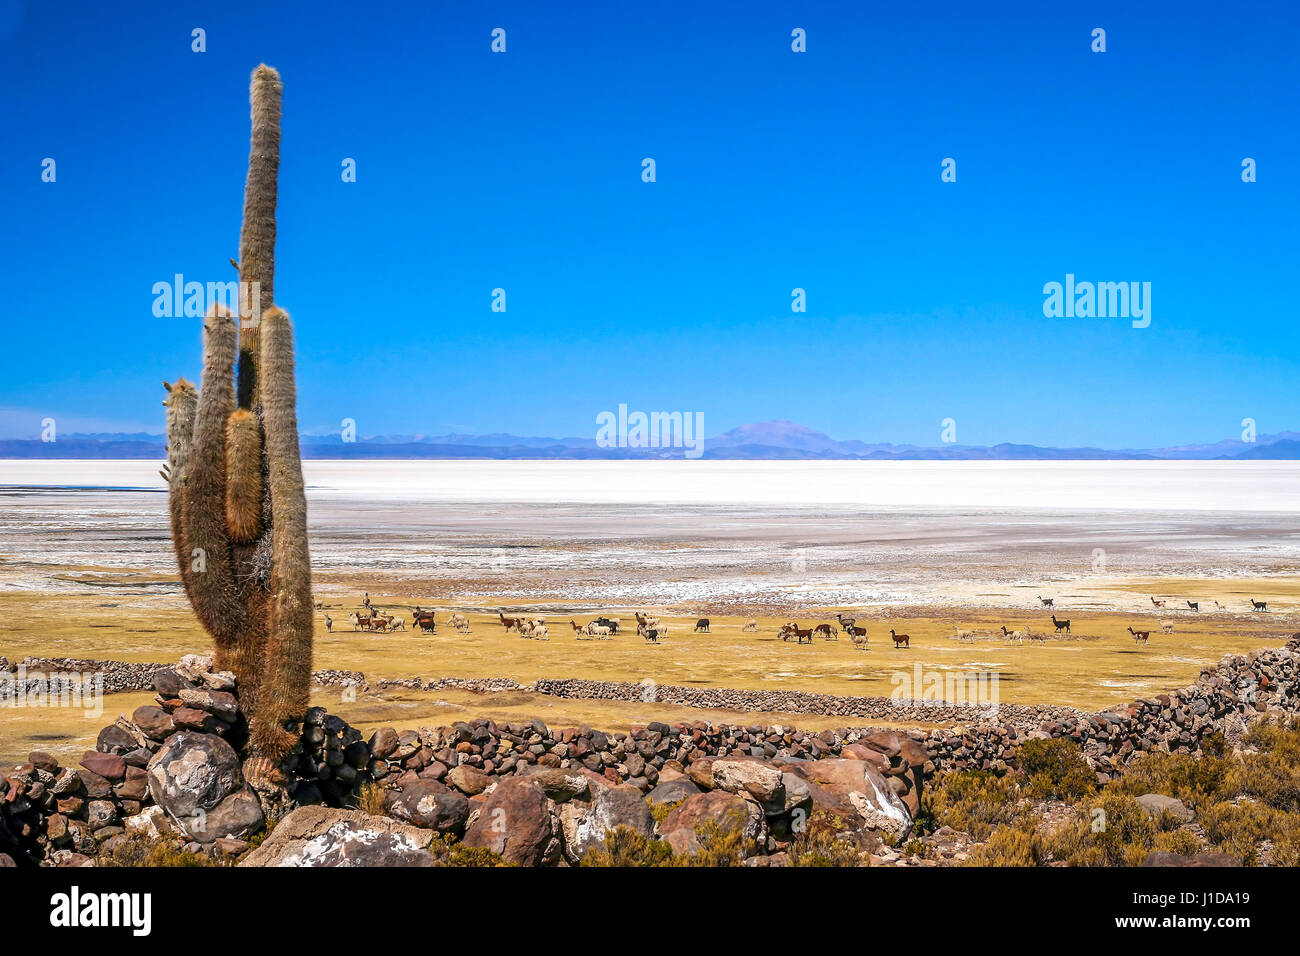 Single cactus growing on a pampa near Salar de Uyuni with a herd of sheeps grazing in the distance, Bolivia Stock Photo